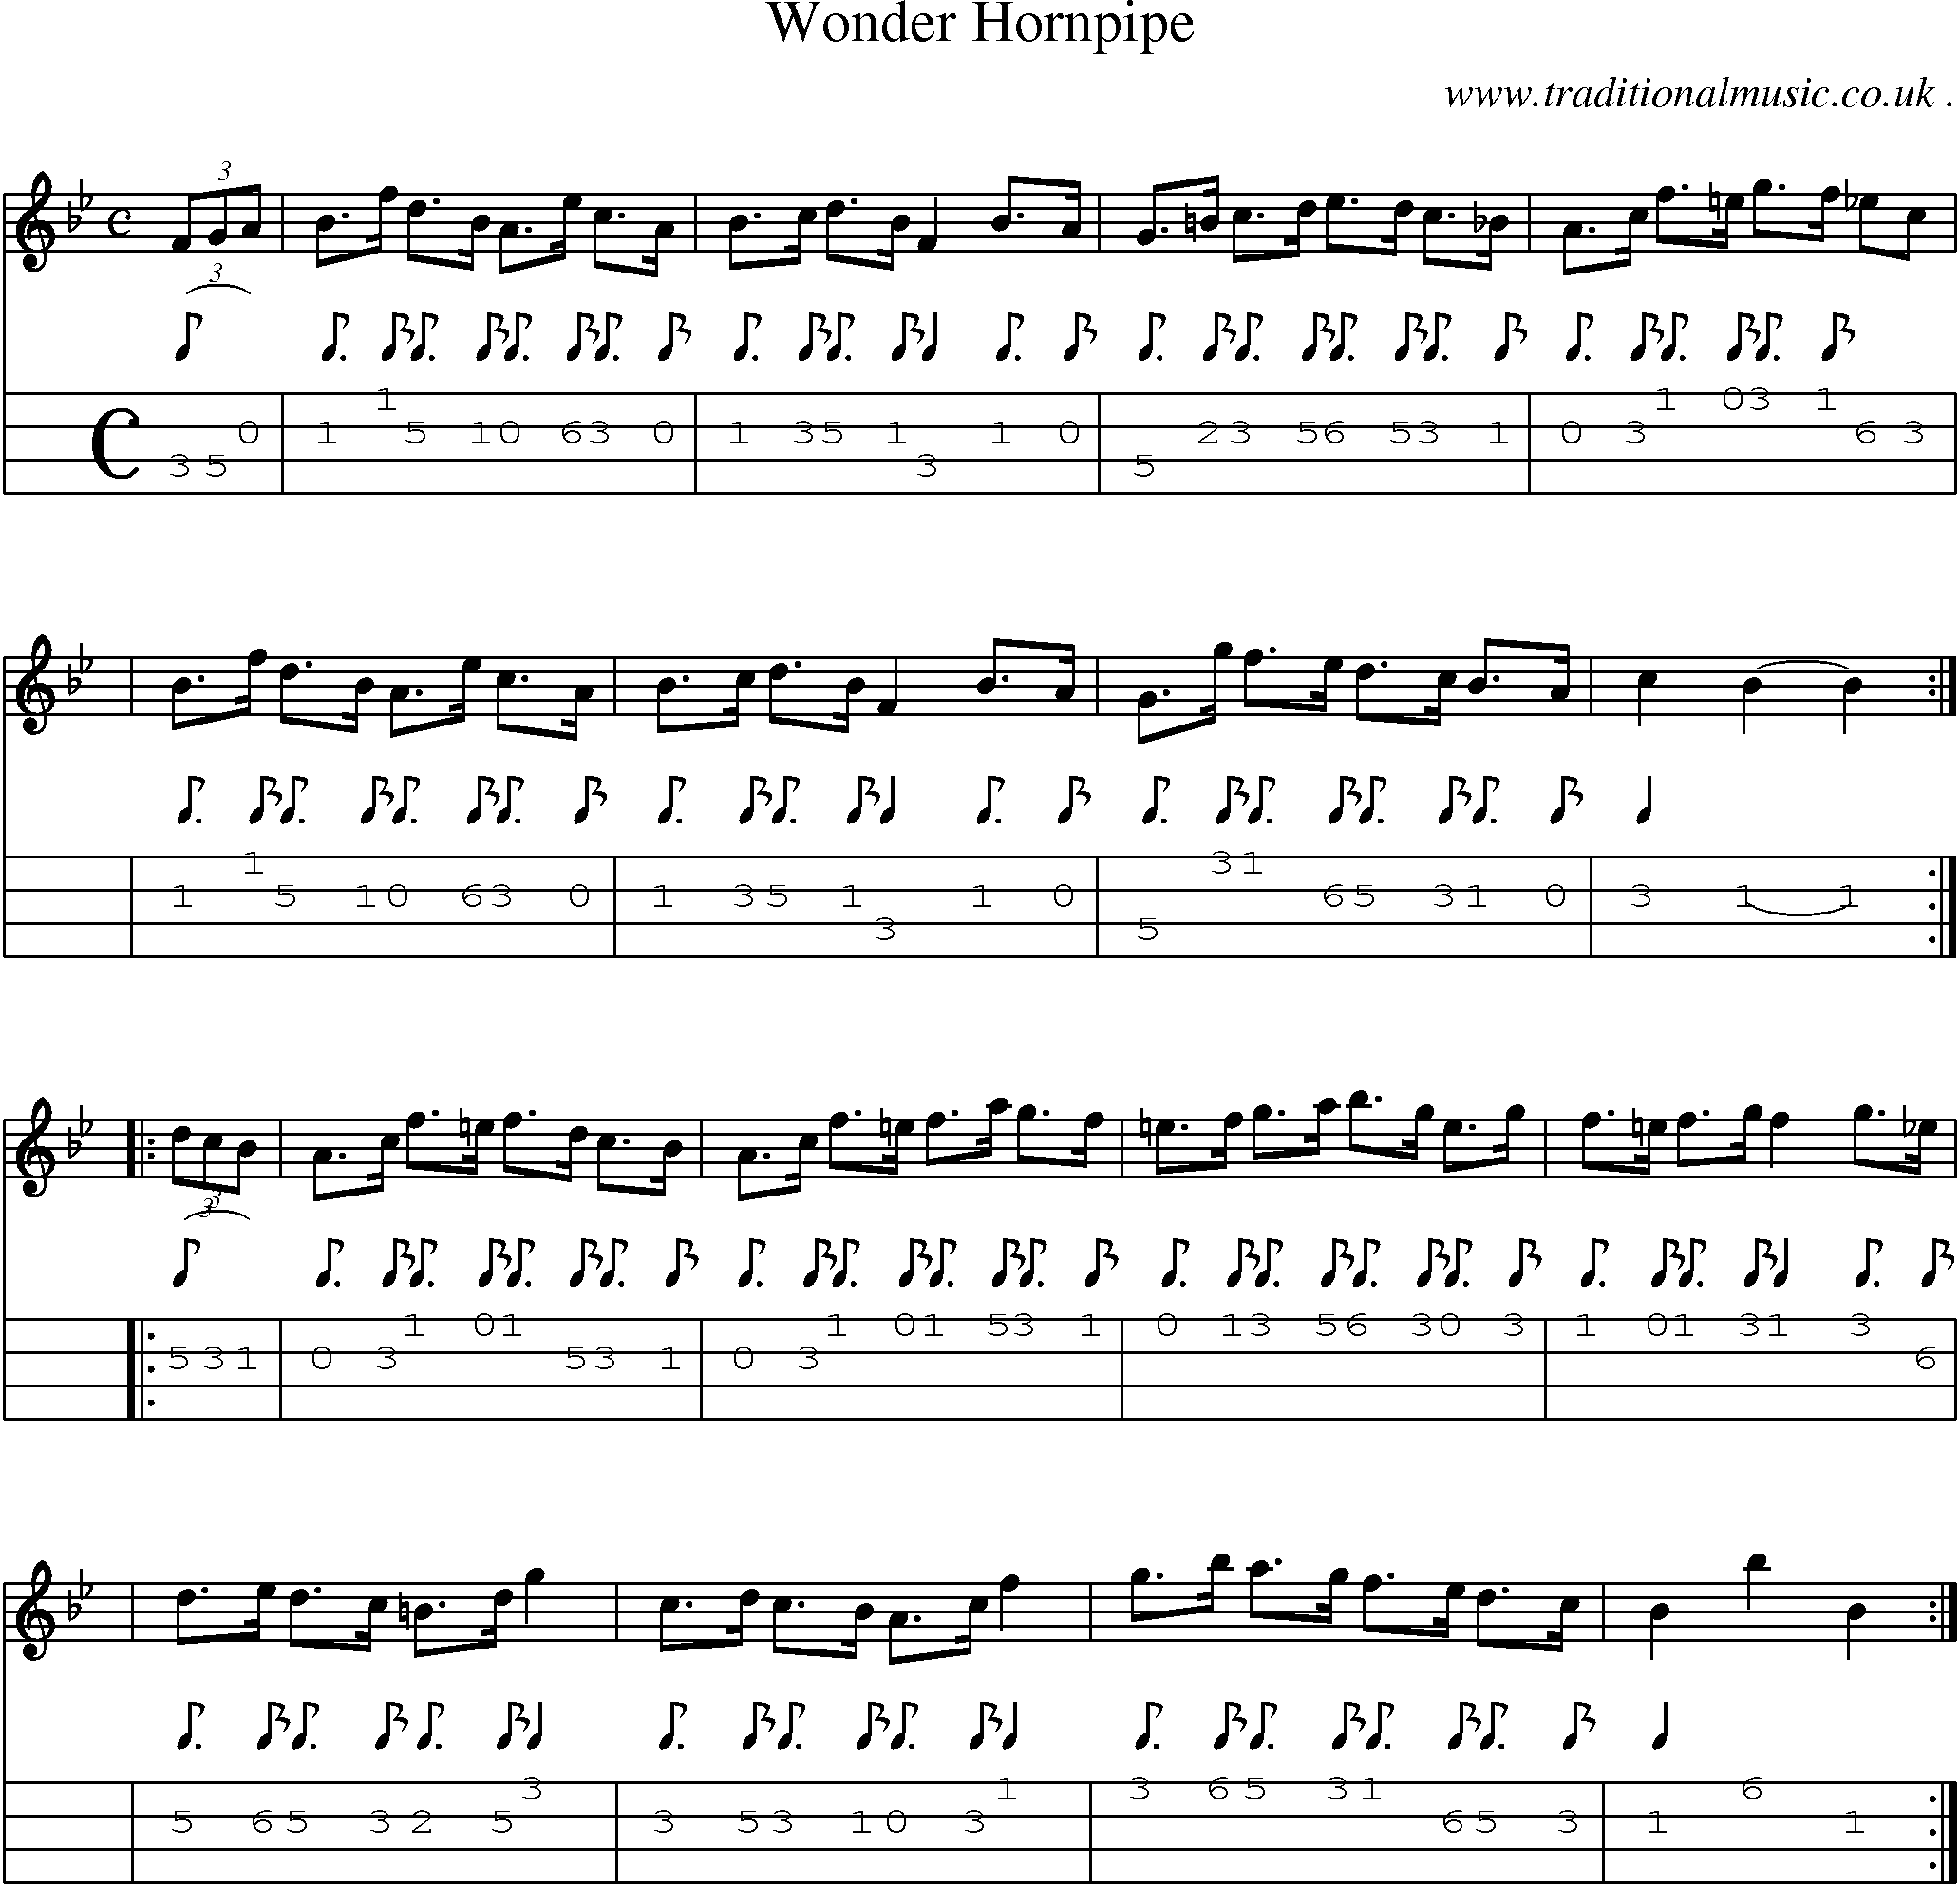 Sheet-music  score, Chords and Mandolin Tabs for Wonder Hornpipe